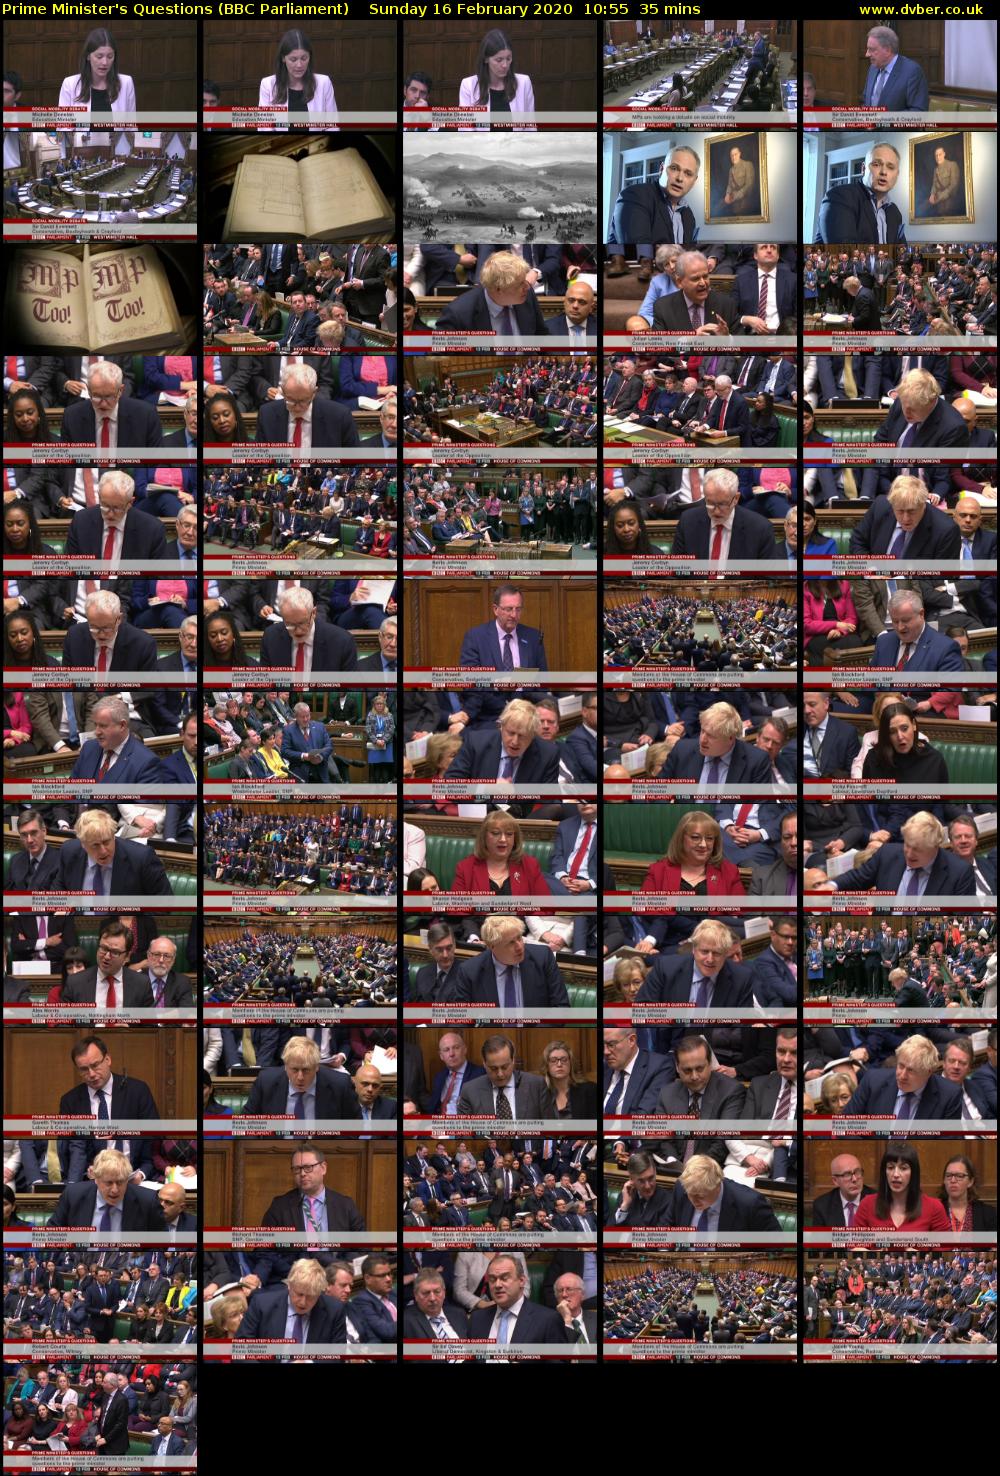 Prime Minister's Questions (BBC Parliament) Sunday 16 February 2020 10:55 - 11:30